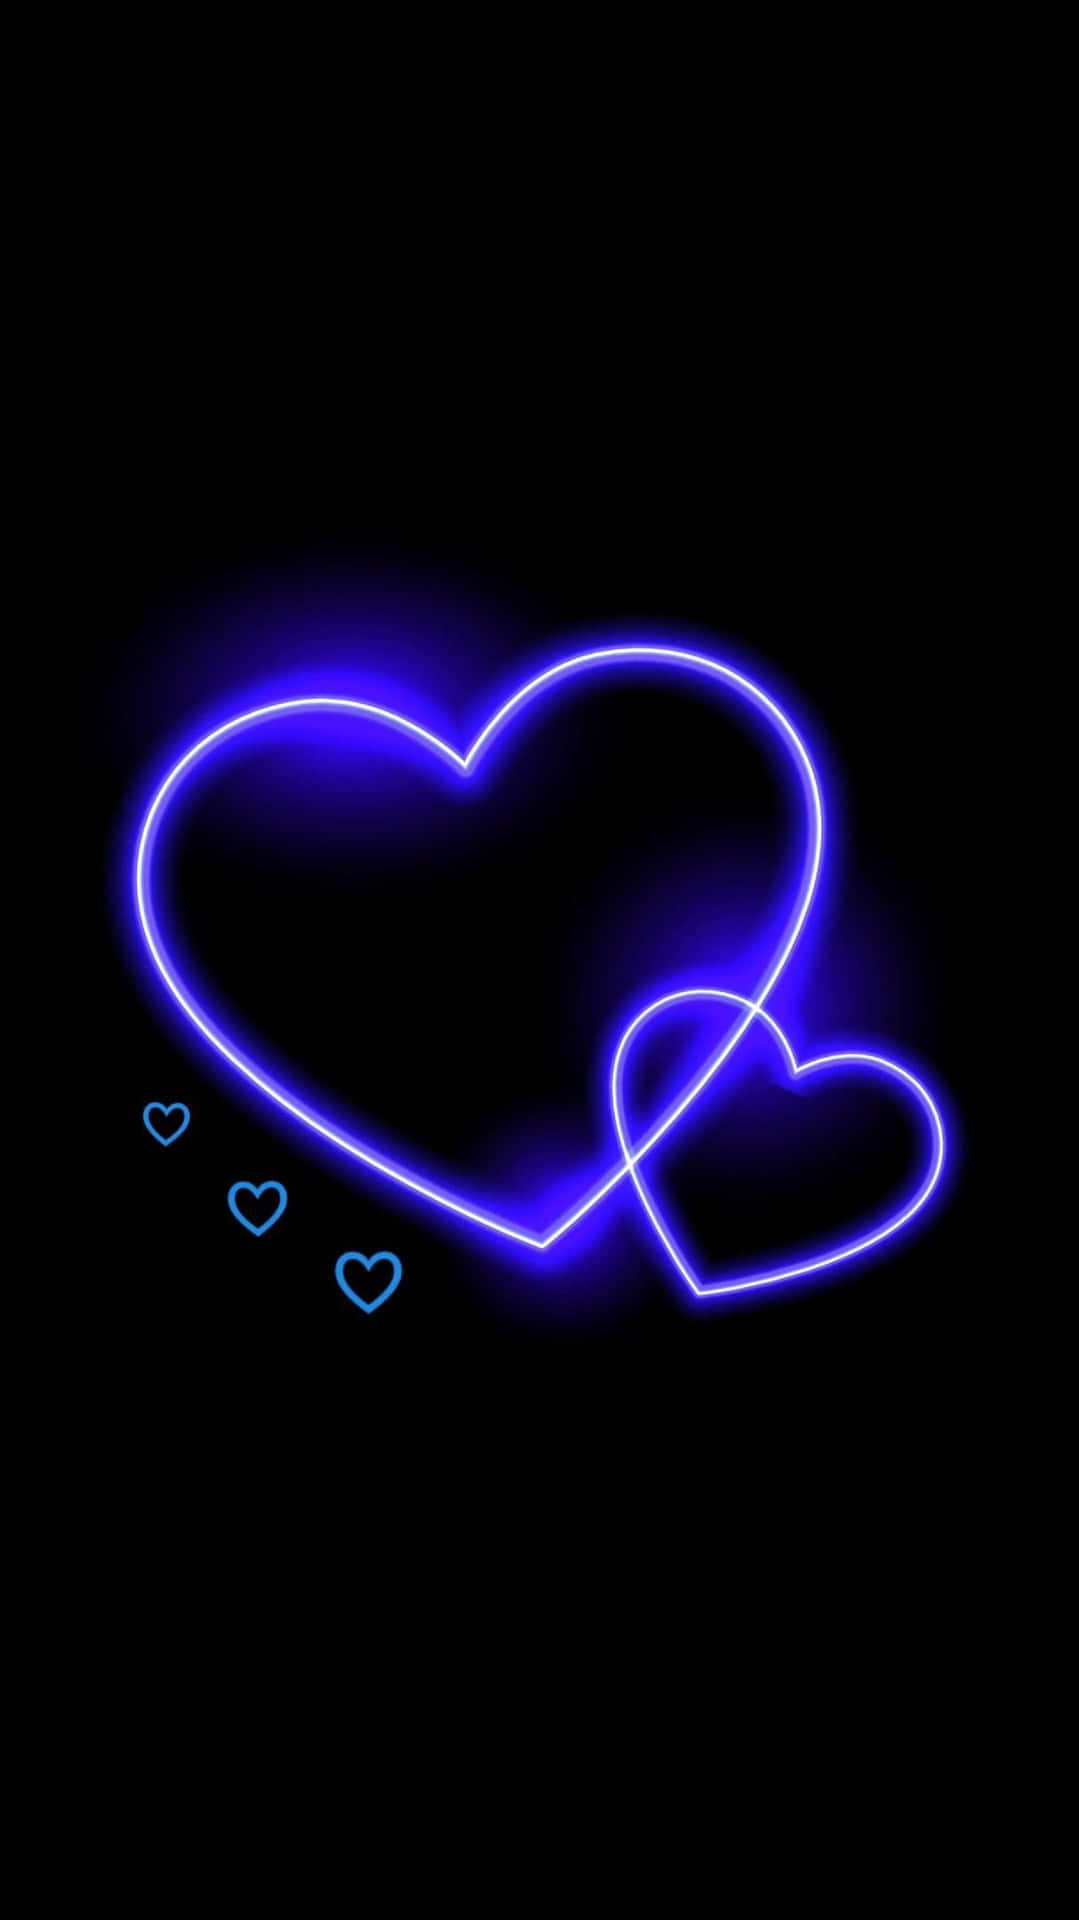 Blue And Purple Hearts Wallpapers